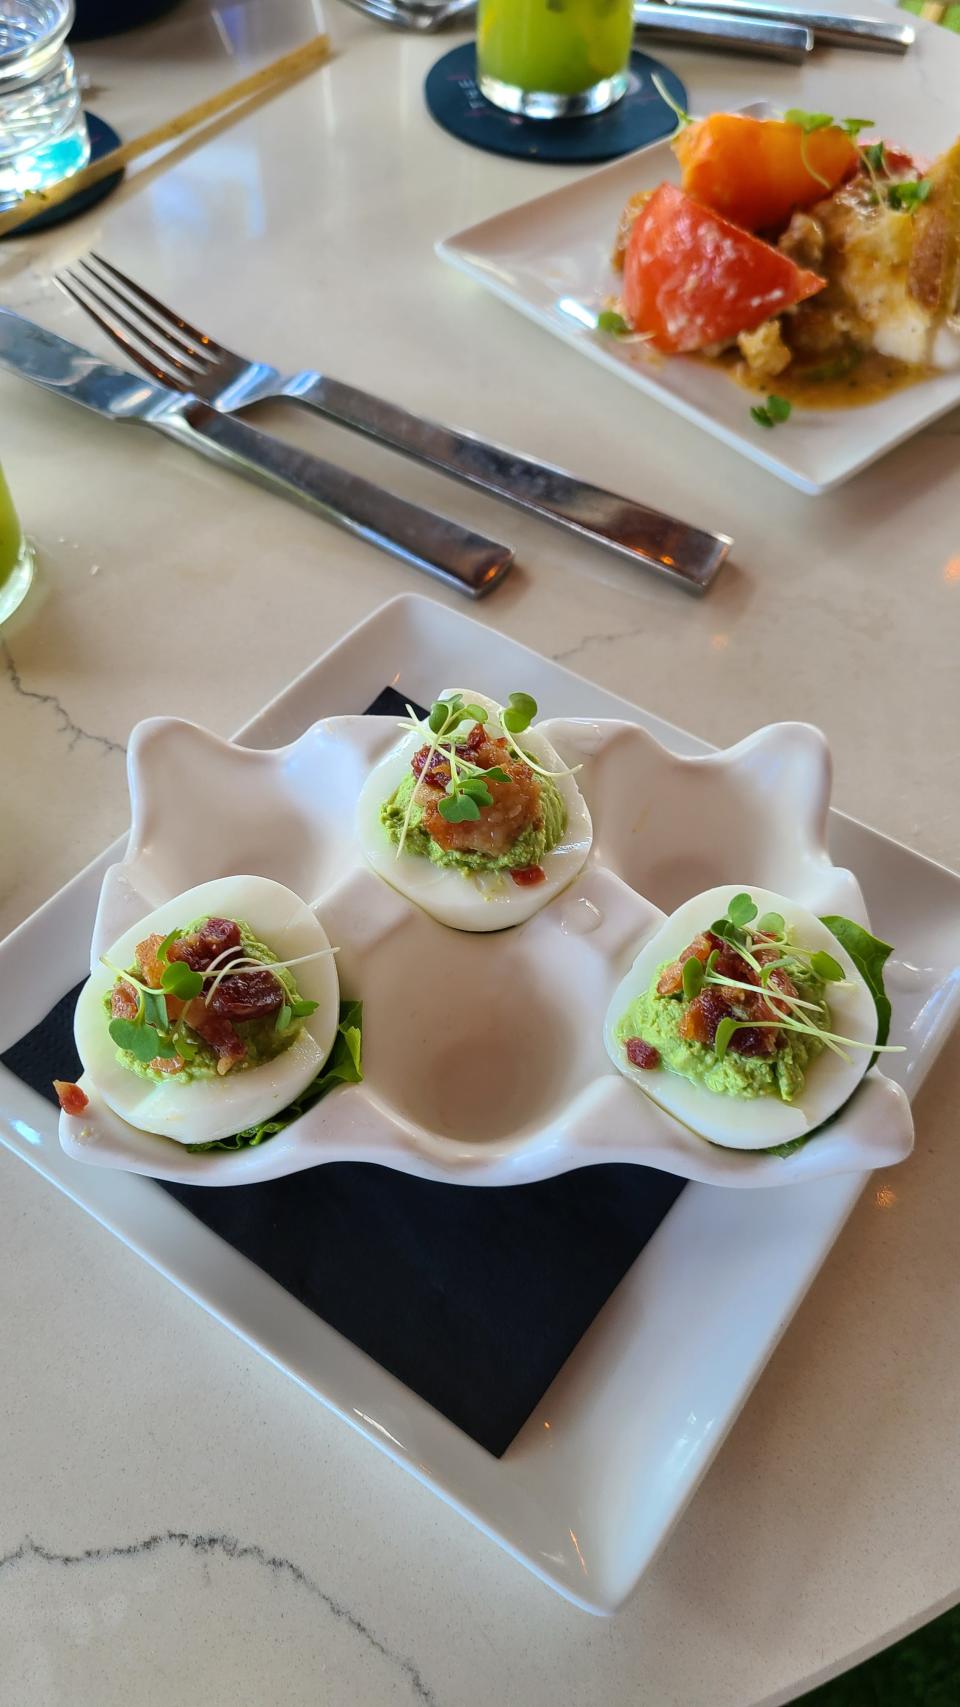 The 239's "Green Goddess" deviled eggs with candied bacon ($9).